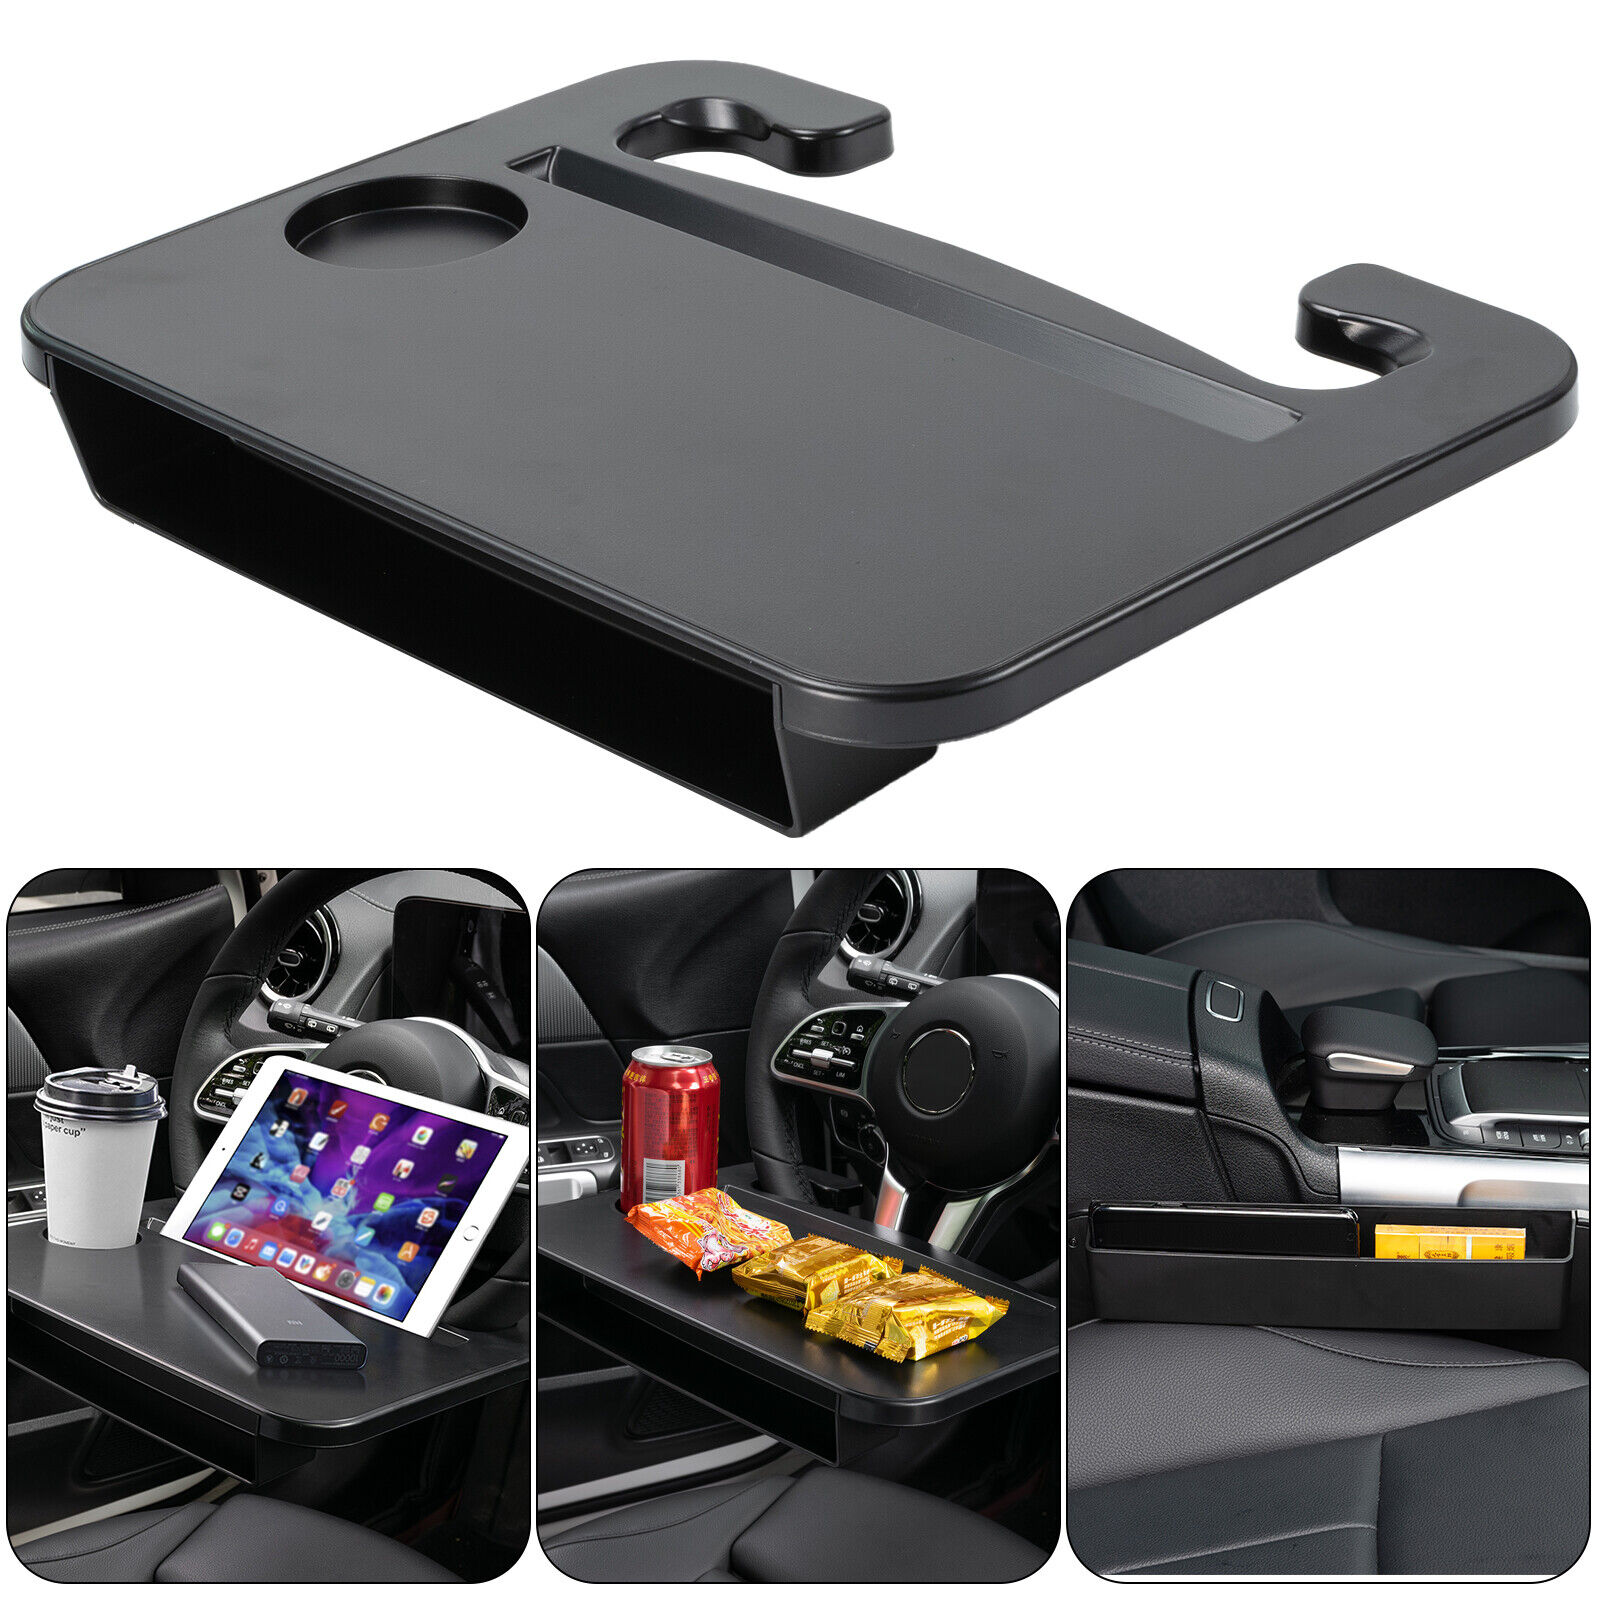 2 in 1 Car Steering Wheel Desk Tray For Laptop Drink Work Table Holder Tray